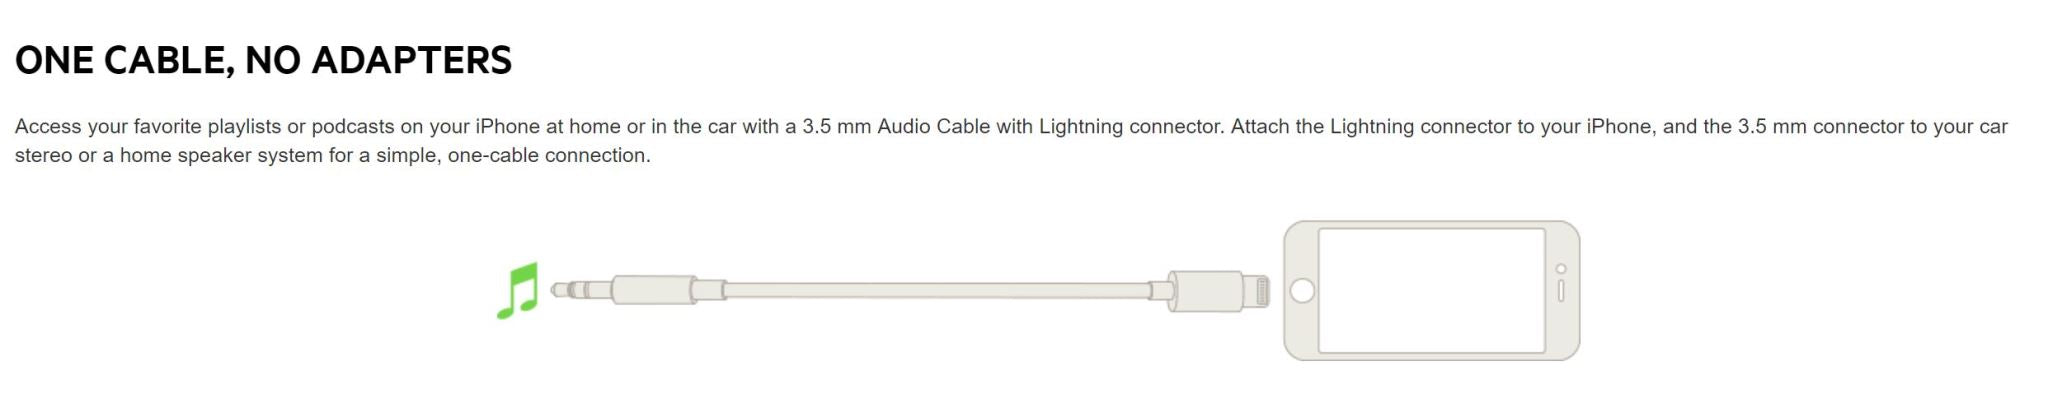 Belkin_Lightning_to_3.5mm_Audio_Cable_Misc_3_RXOBX0SHTDC3.JPG